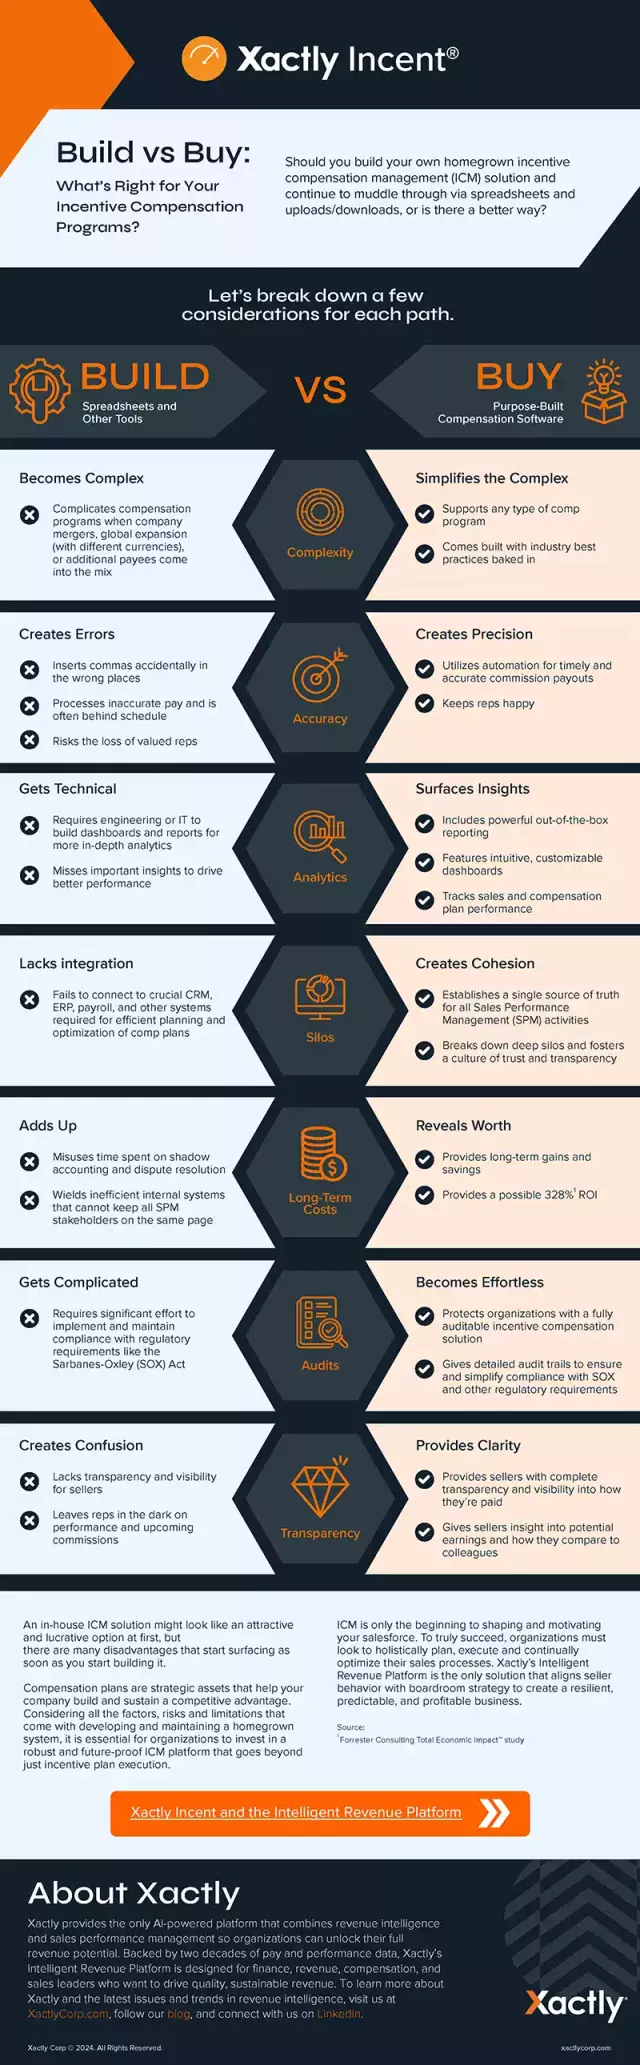 Build vs Buy Infographic - Incent